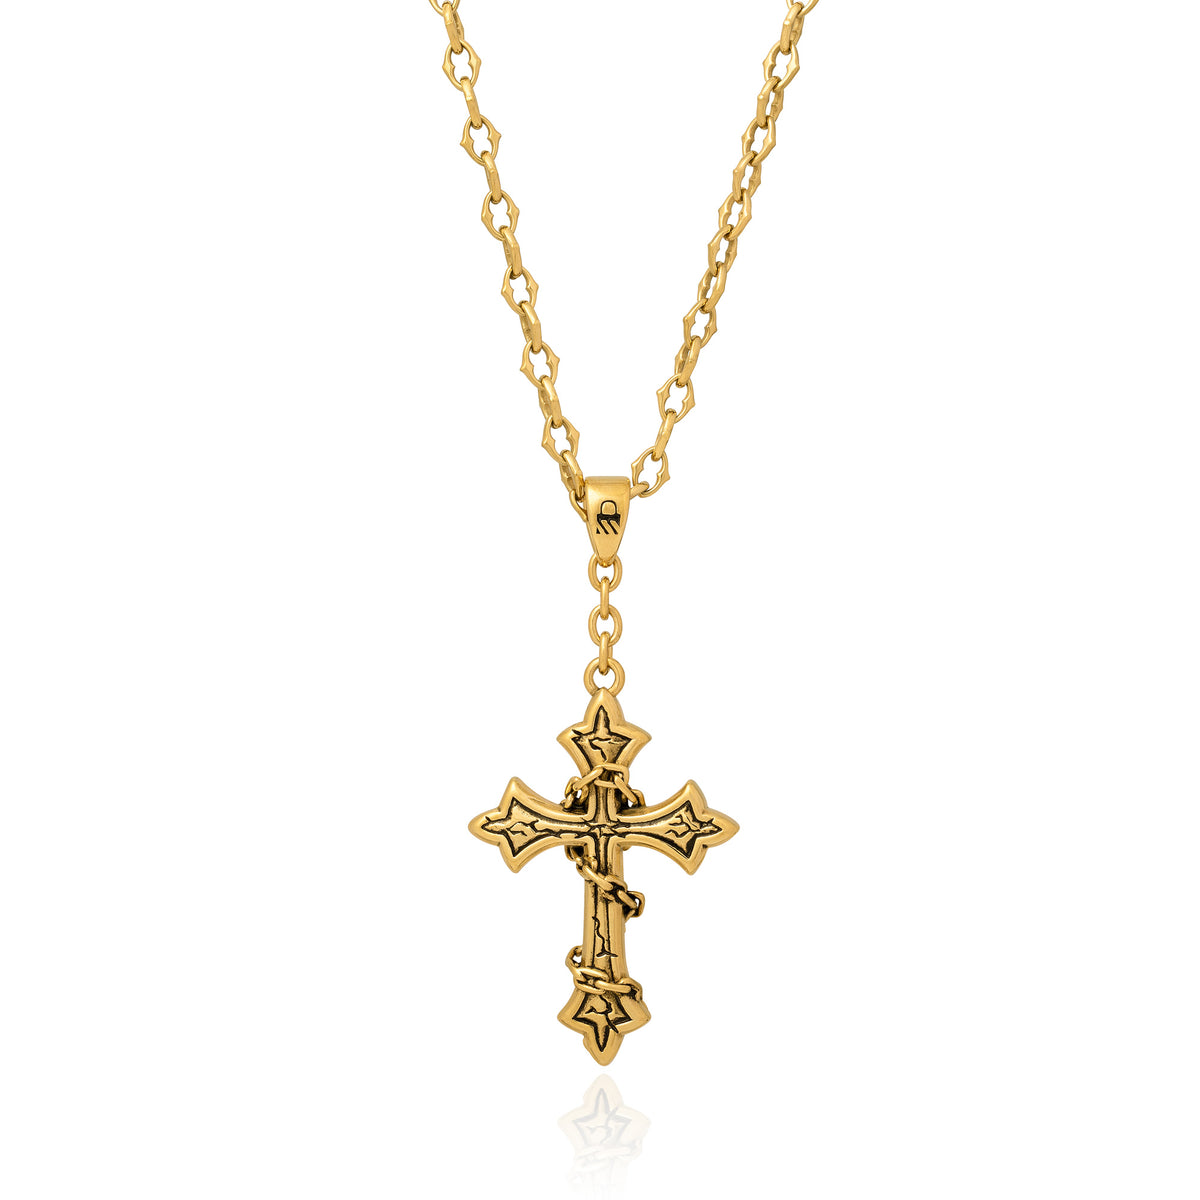 gothic spiked chain with cross pendant in 18k gold